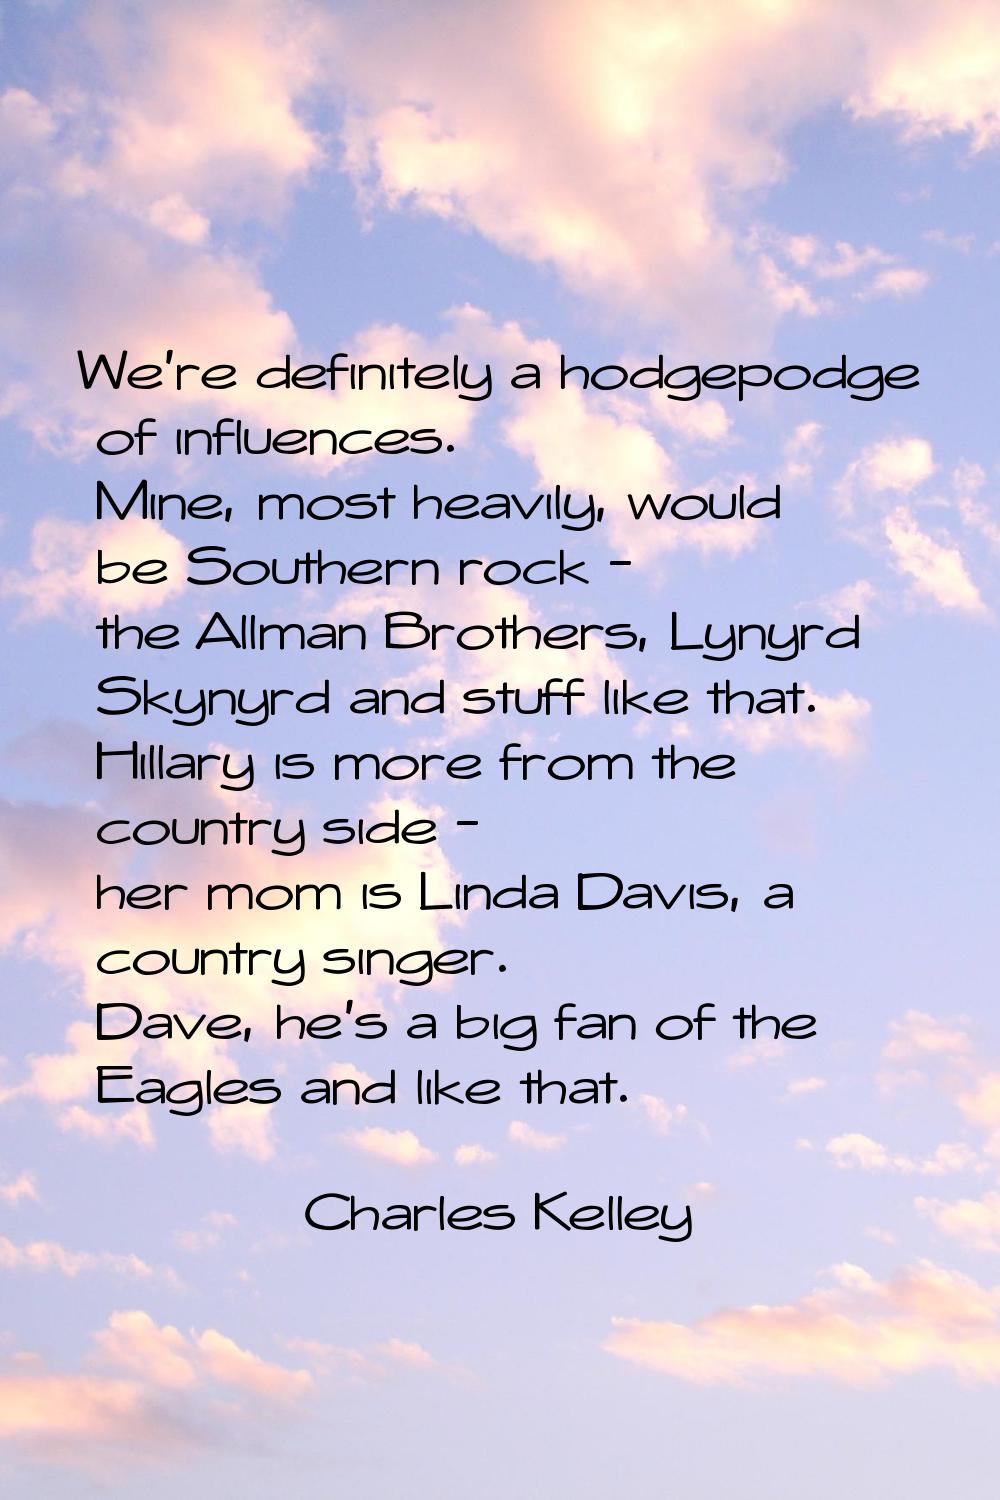 We're definitely a hodgepodge of influences. Mine, most heavily, would be Southern rock - the Allma